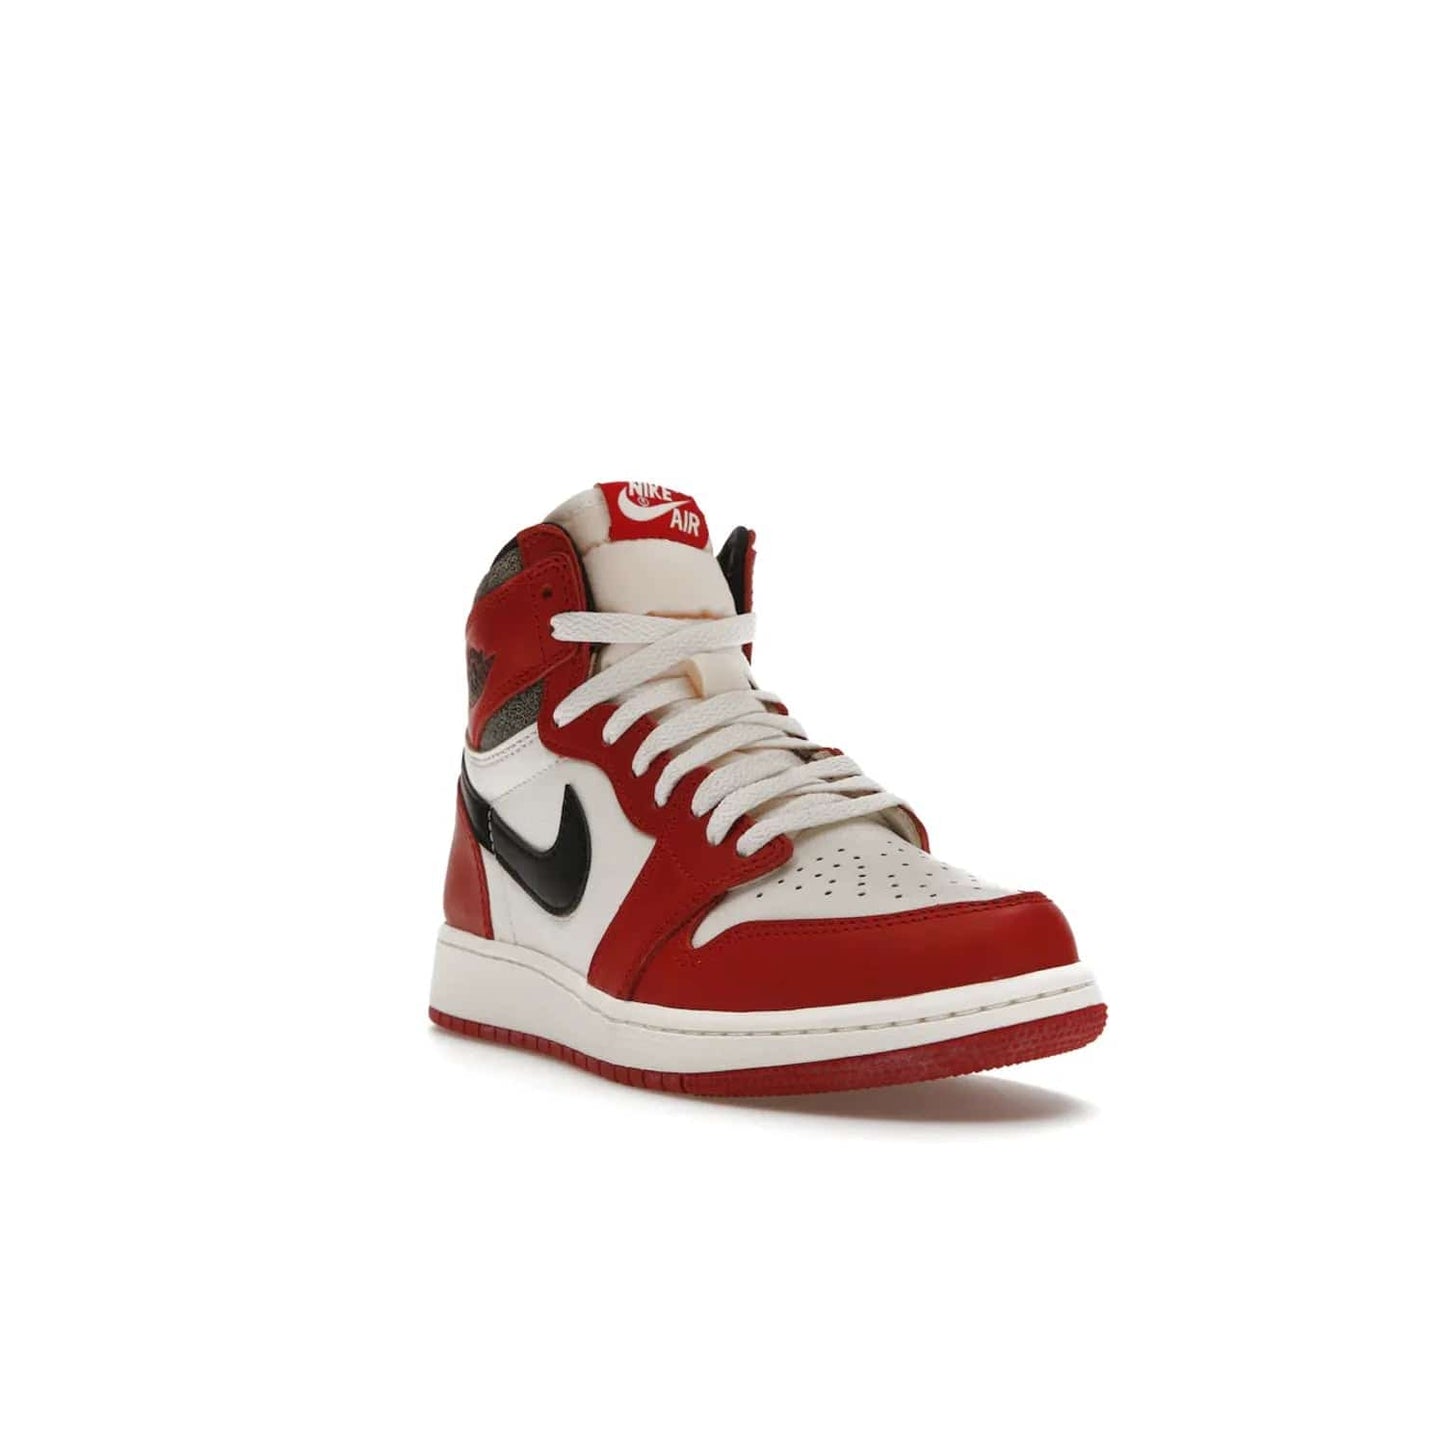 Jordan 1 Retro High OG Chicago Lost and Found (GS) - Image 7 - Only at www.BallersClubKickz.com - Grab the Air Jordan 1 Retro High OG Chicago Reimagined GS, presenting in classic 1985 silhouette. Varsity Red, Black, Muslin and Sail hues, featuring Nike Air branding, Wings on the collars and printed insoles. Don't miss out when it releases 19th Nov 2022.